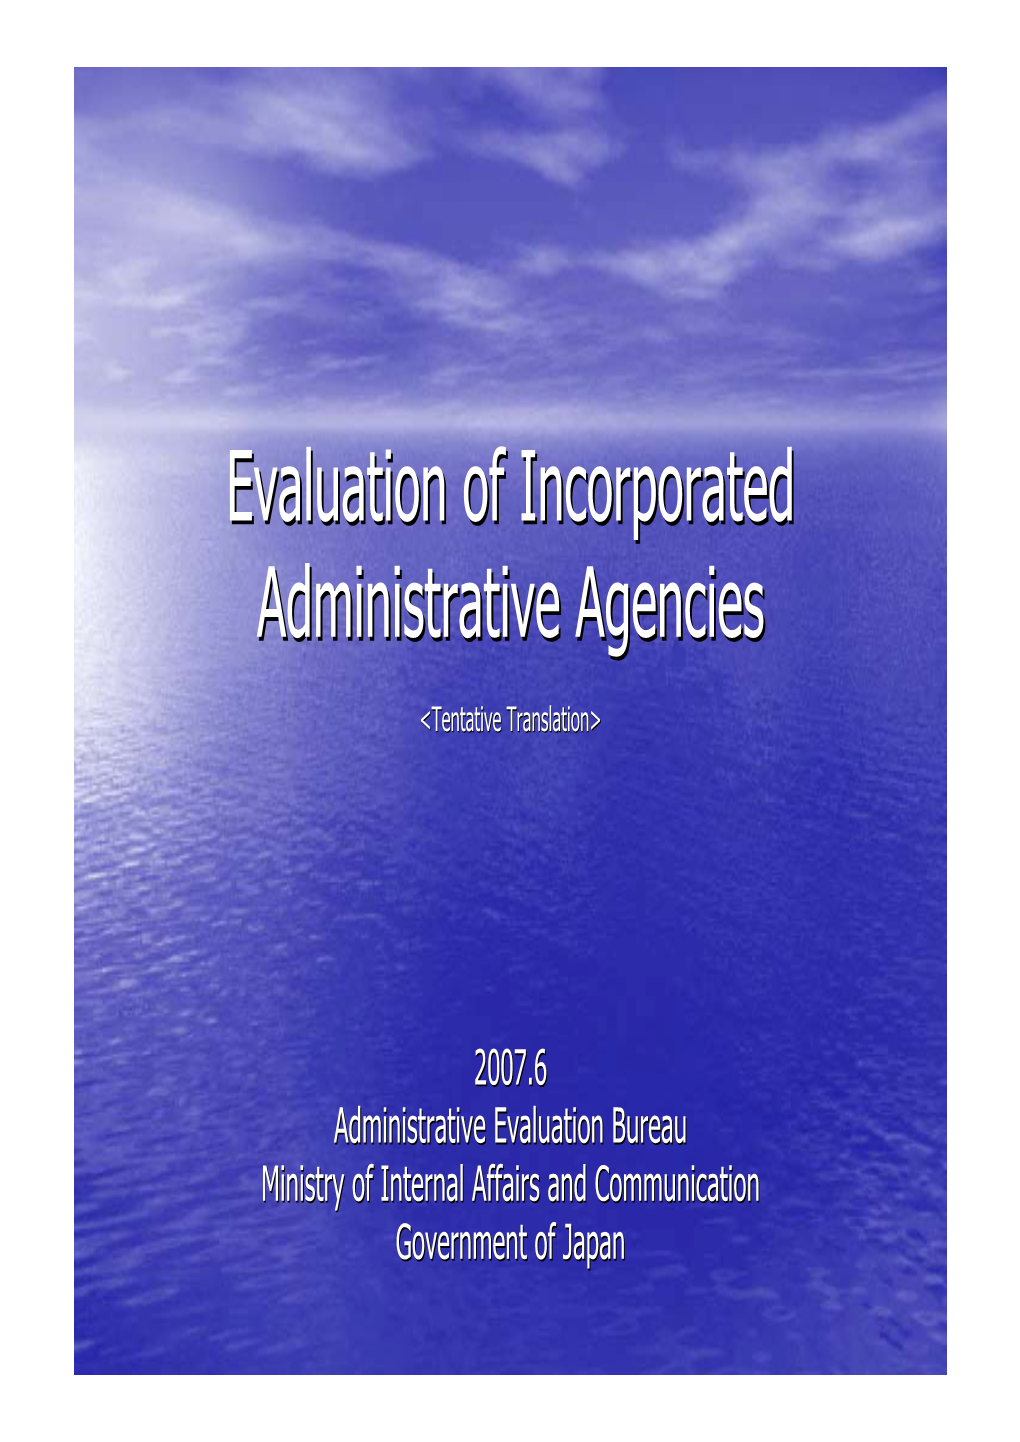 Evaluation of Incorporated Administrative Agencies